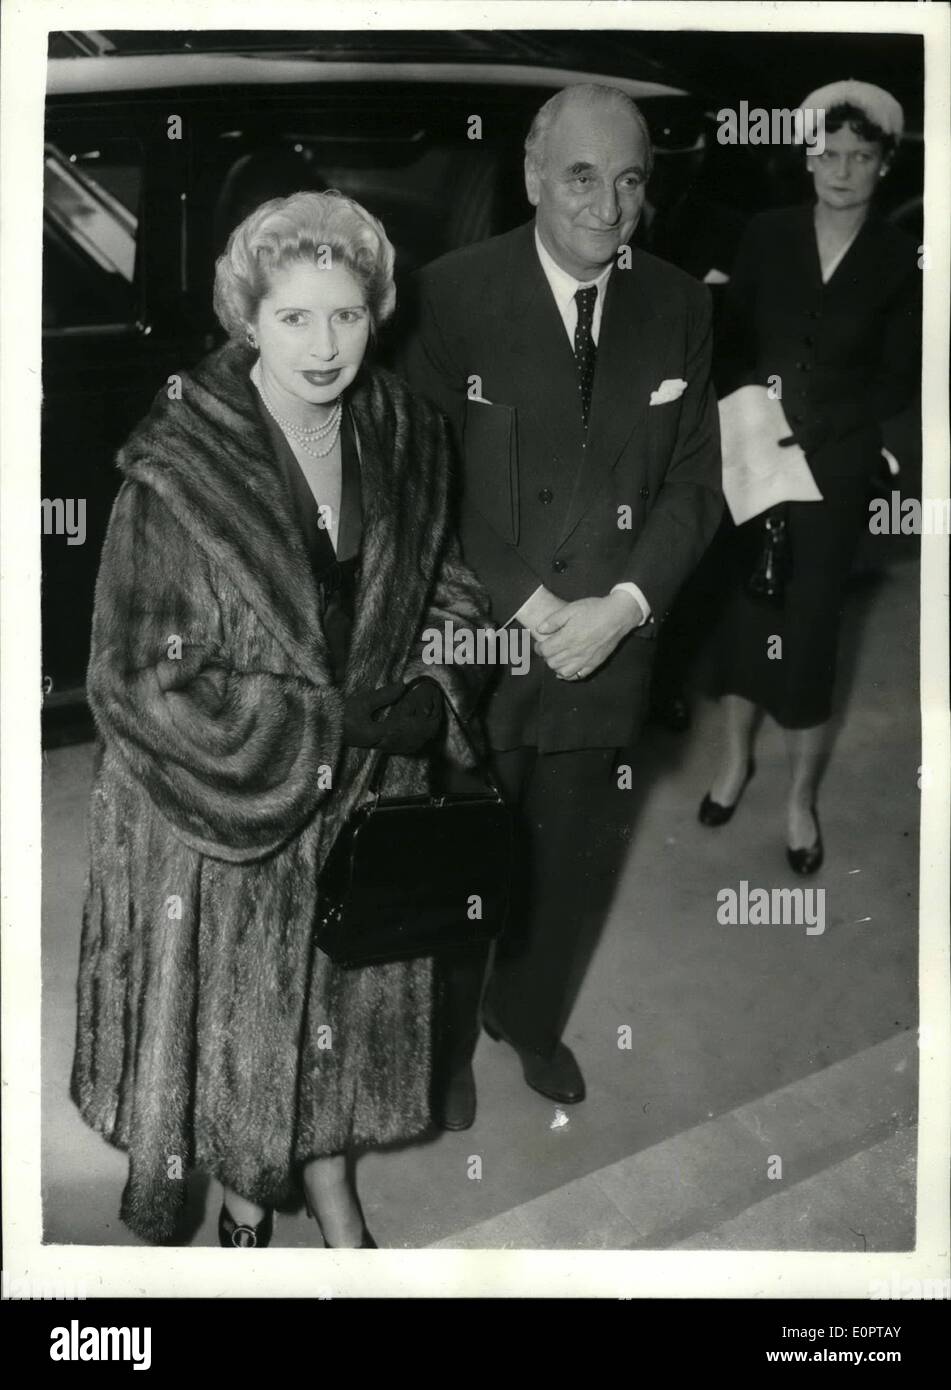 Dec. 12, 1956 - Sir Bernard and Lady Docker attends B.S.A. meeting continue struggle to Reinstatement: Sir Bernard and Lady Docker attended the Annual meeting of the Birmingham Small Arms Group at Winchester House in the City this morning. This is the first annual meeting of the BSA since Sir Bernard was dismissed as Chairman and Managing Director in May. Sir Bernard is expected to continue his struggle to get back his old job as Chairman. Photo Shows Sir Bernard and Lady Docker arriving for the meeting this morning. Stock Photo